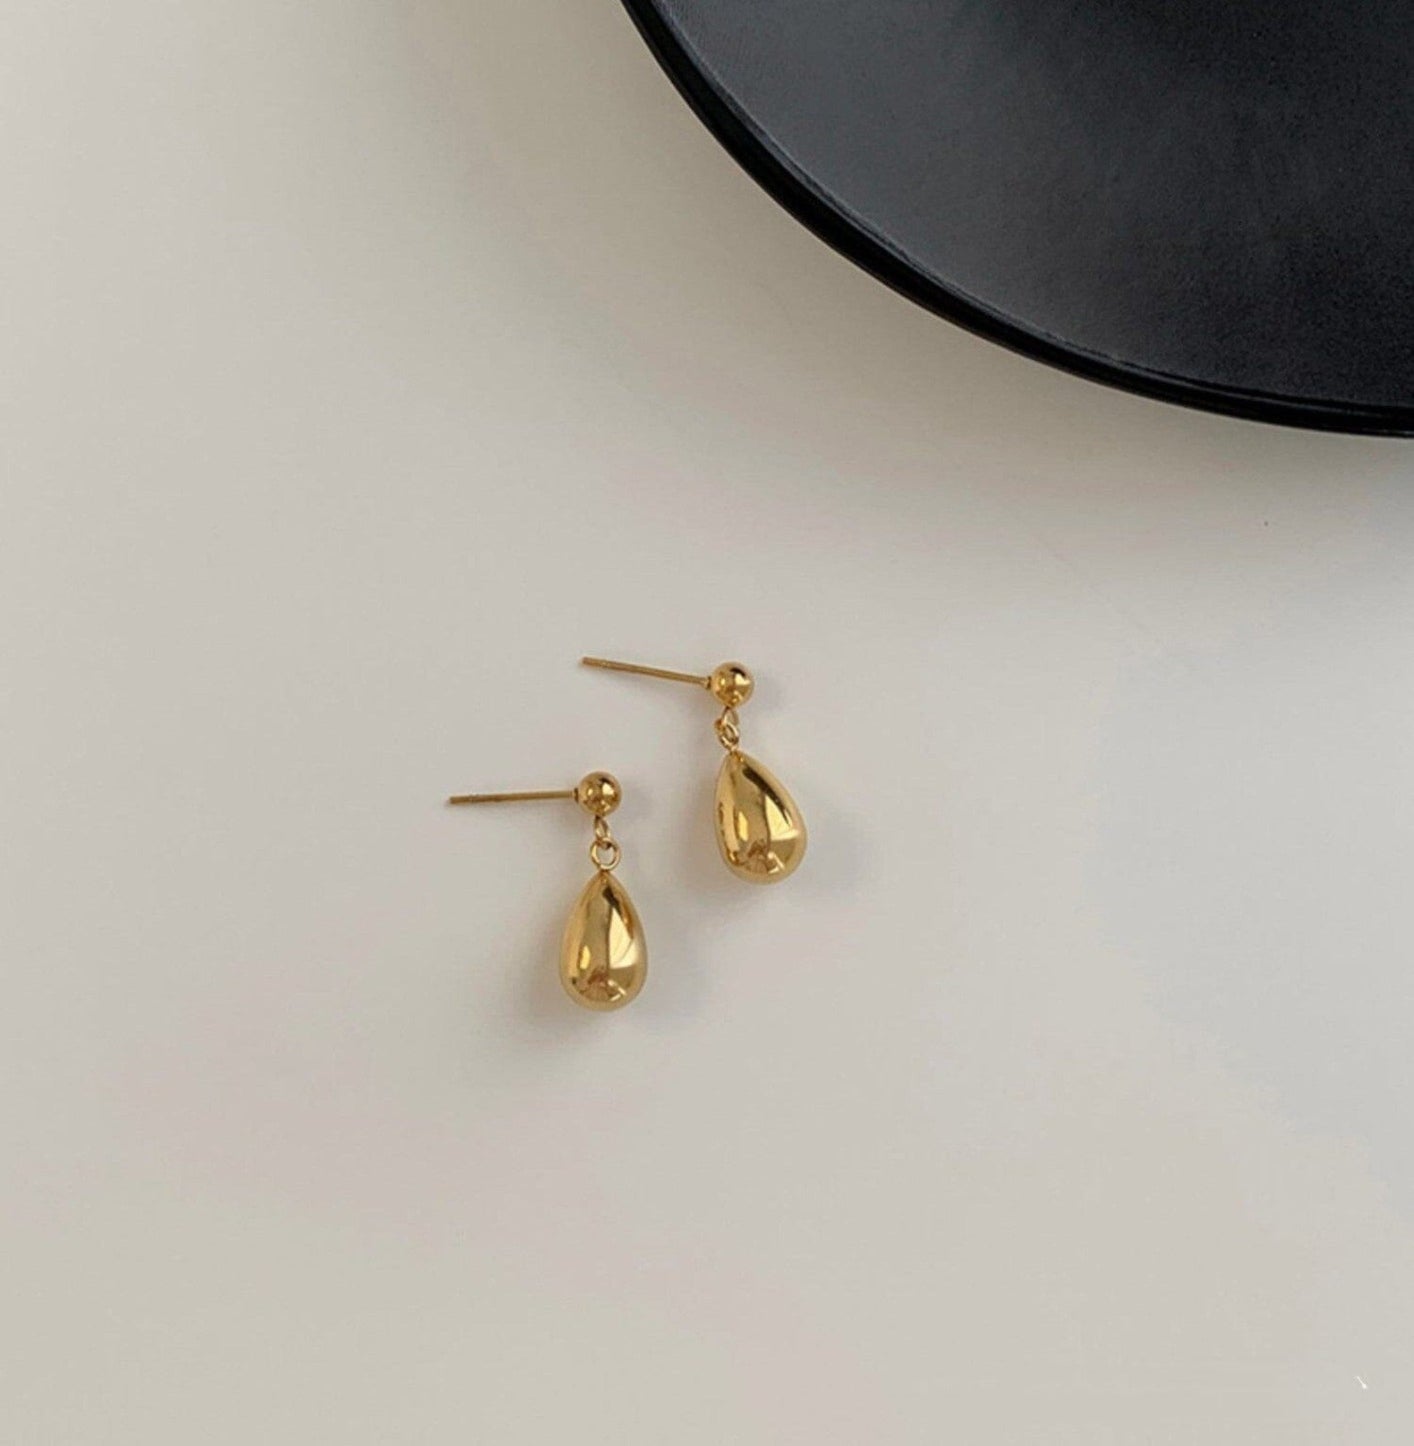 AUDREY EARRINGS earing Yubama Jewelry Online Store - The Elegant Designs of Gold and Silver ! 